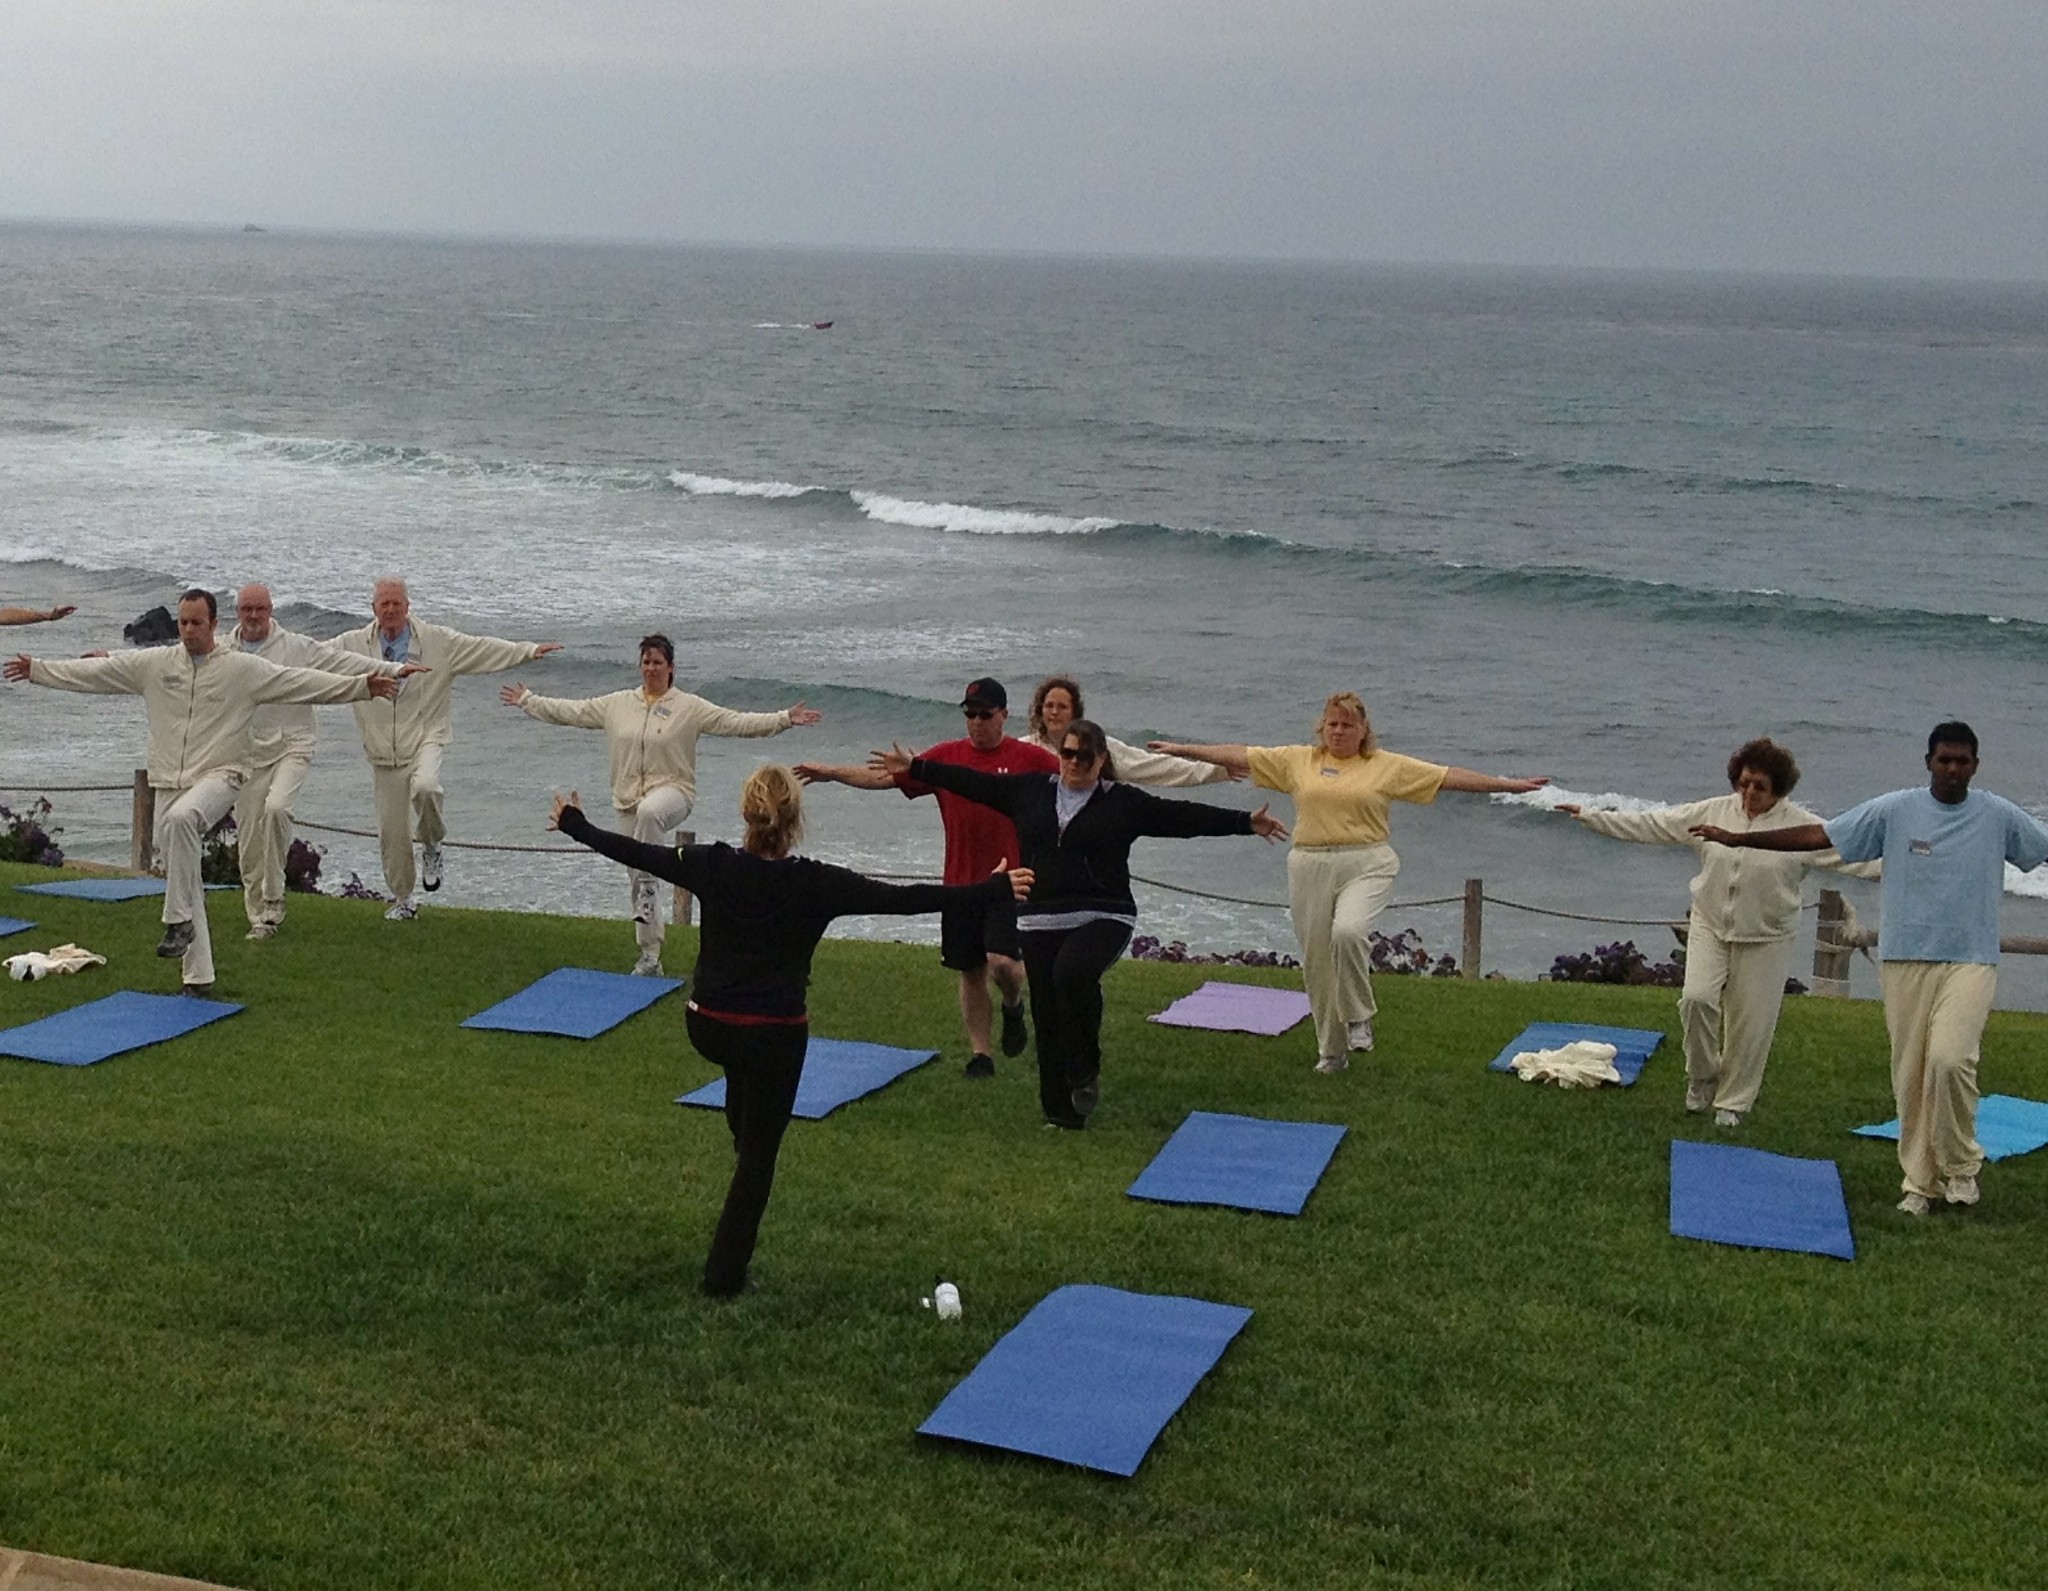 The RESET winners working out ocean side with Kathy Kaehler